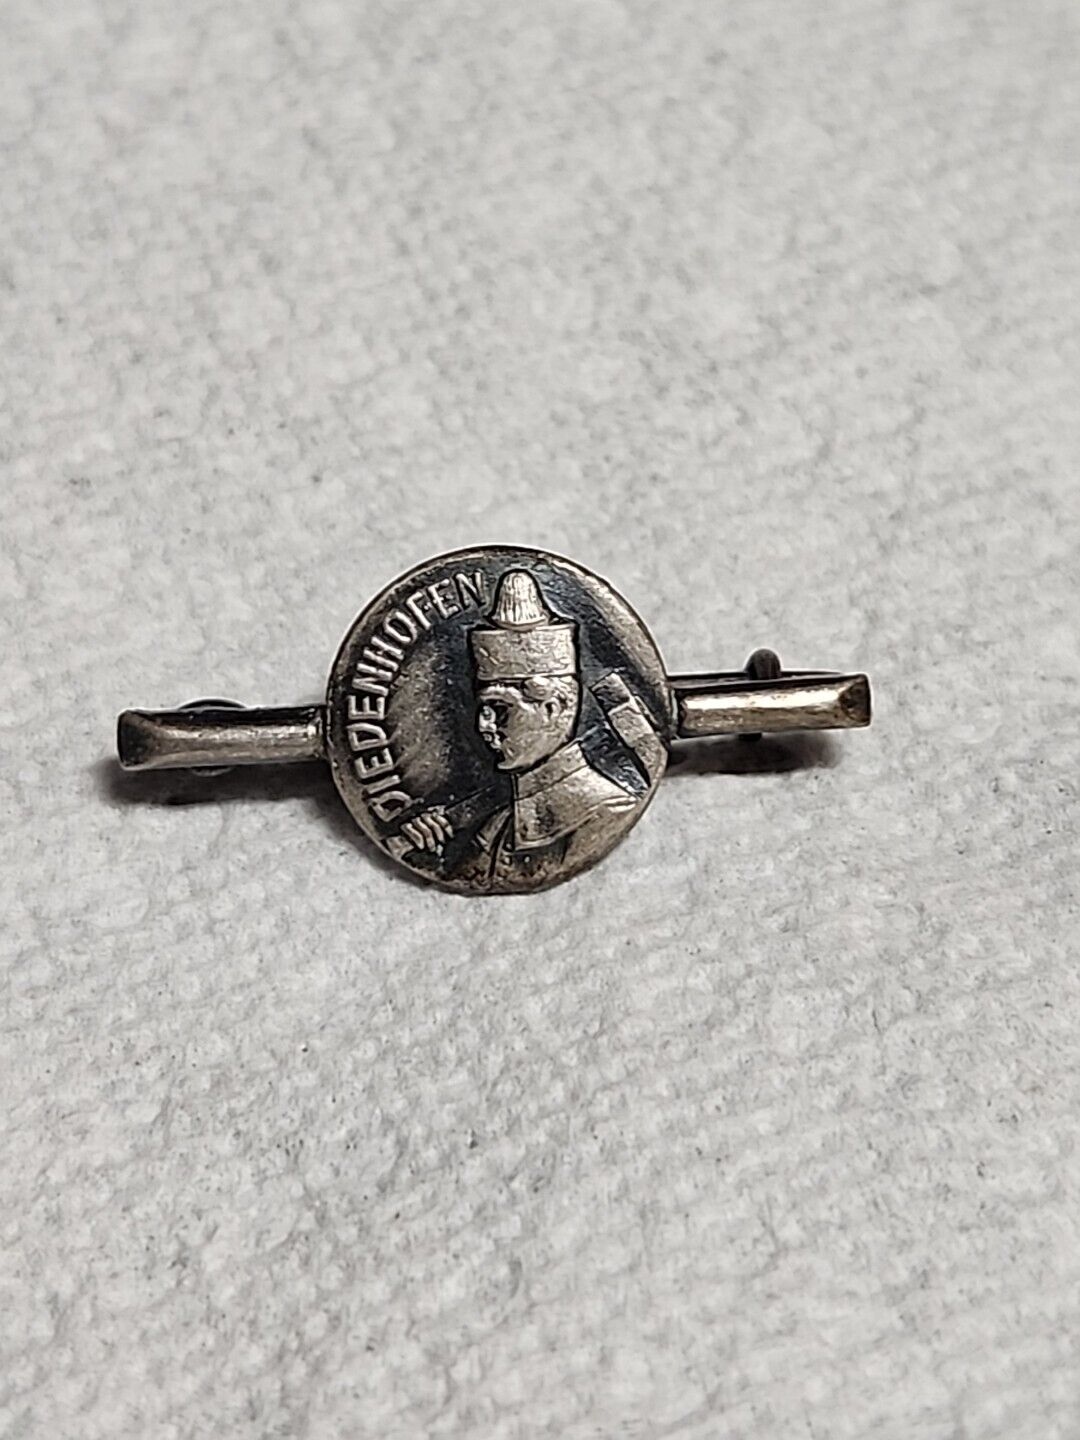 Antique Old Rare WWI WW1 German Miltary Germany Pin Diedenhofen Now Thionville 